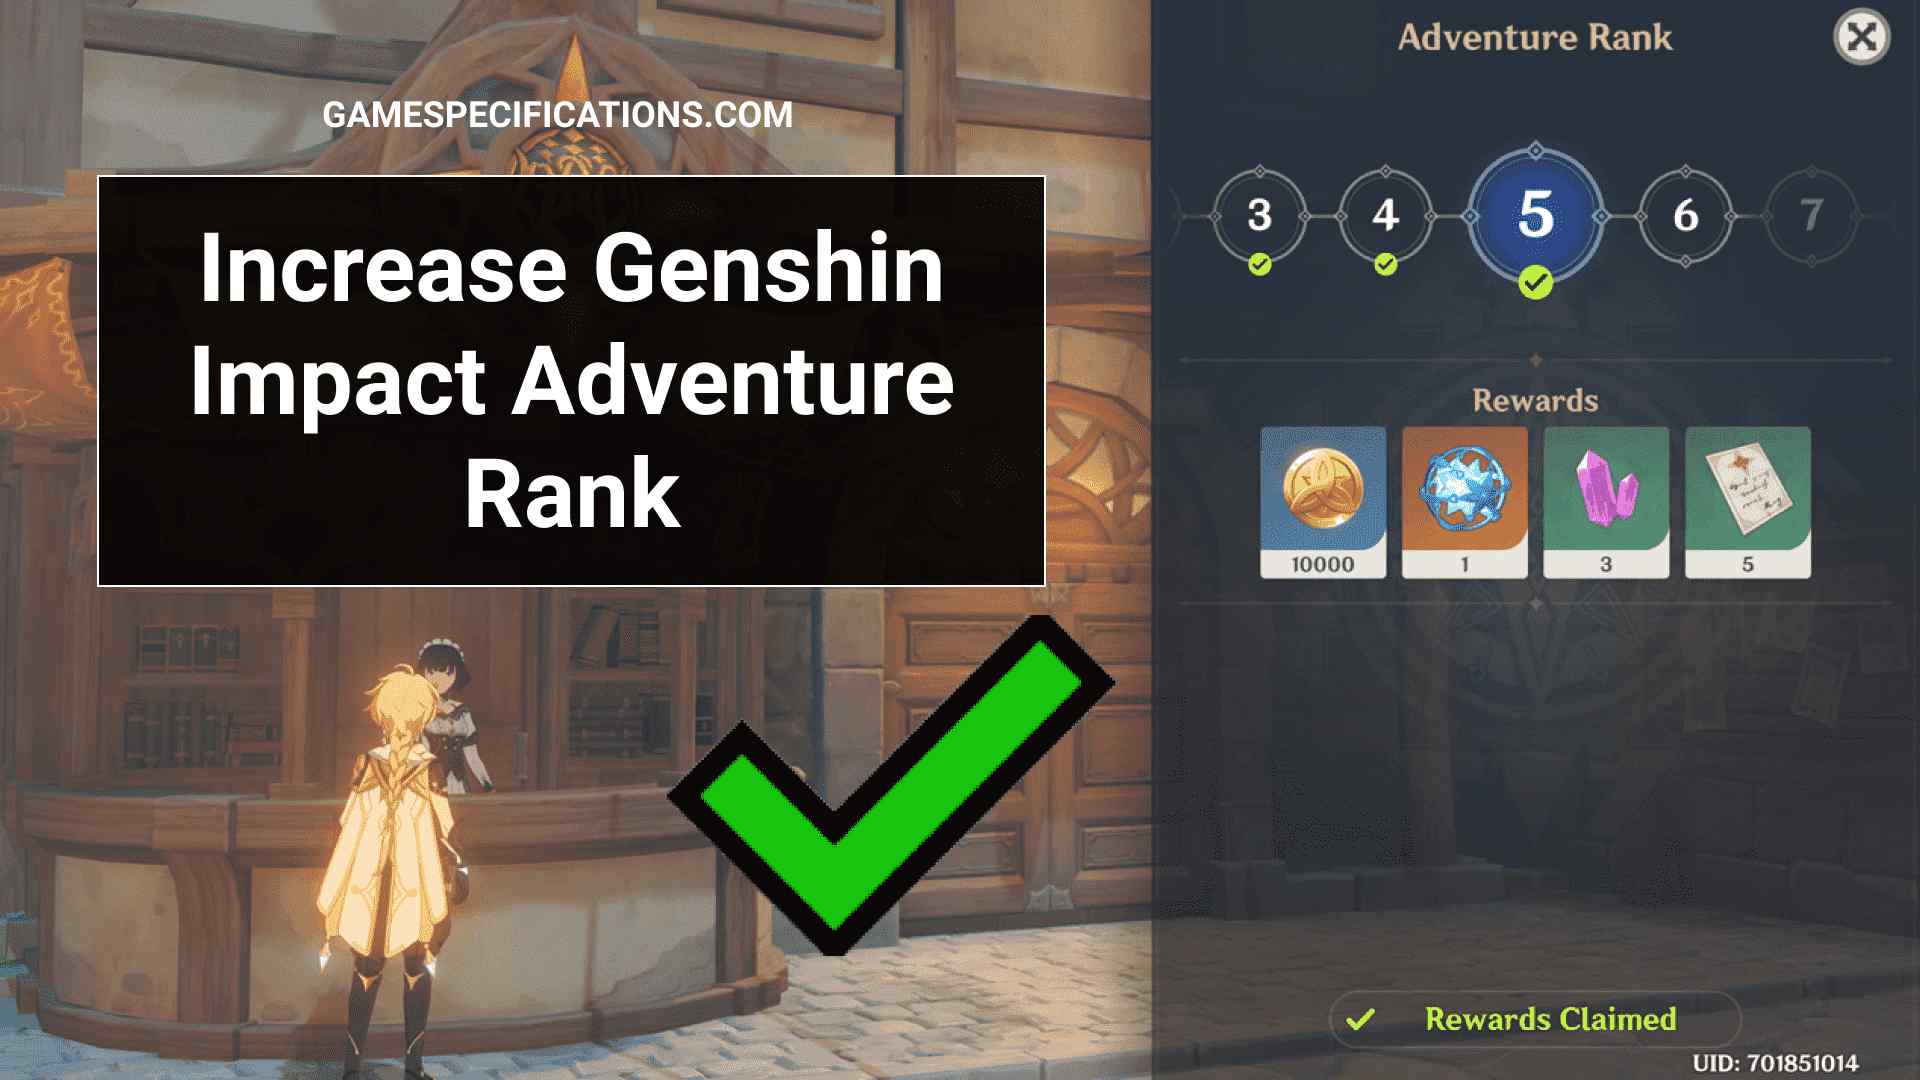 Increase Adventure Rank Genshin Impact With 6 Easy Steps